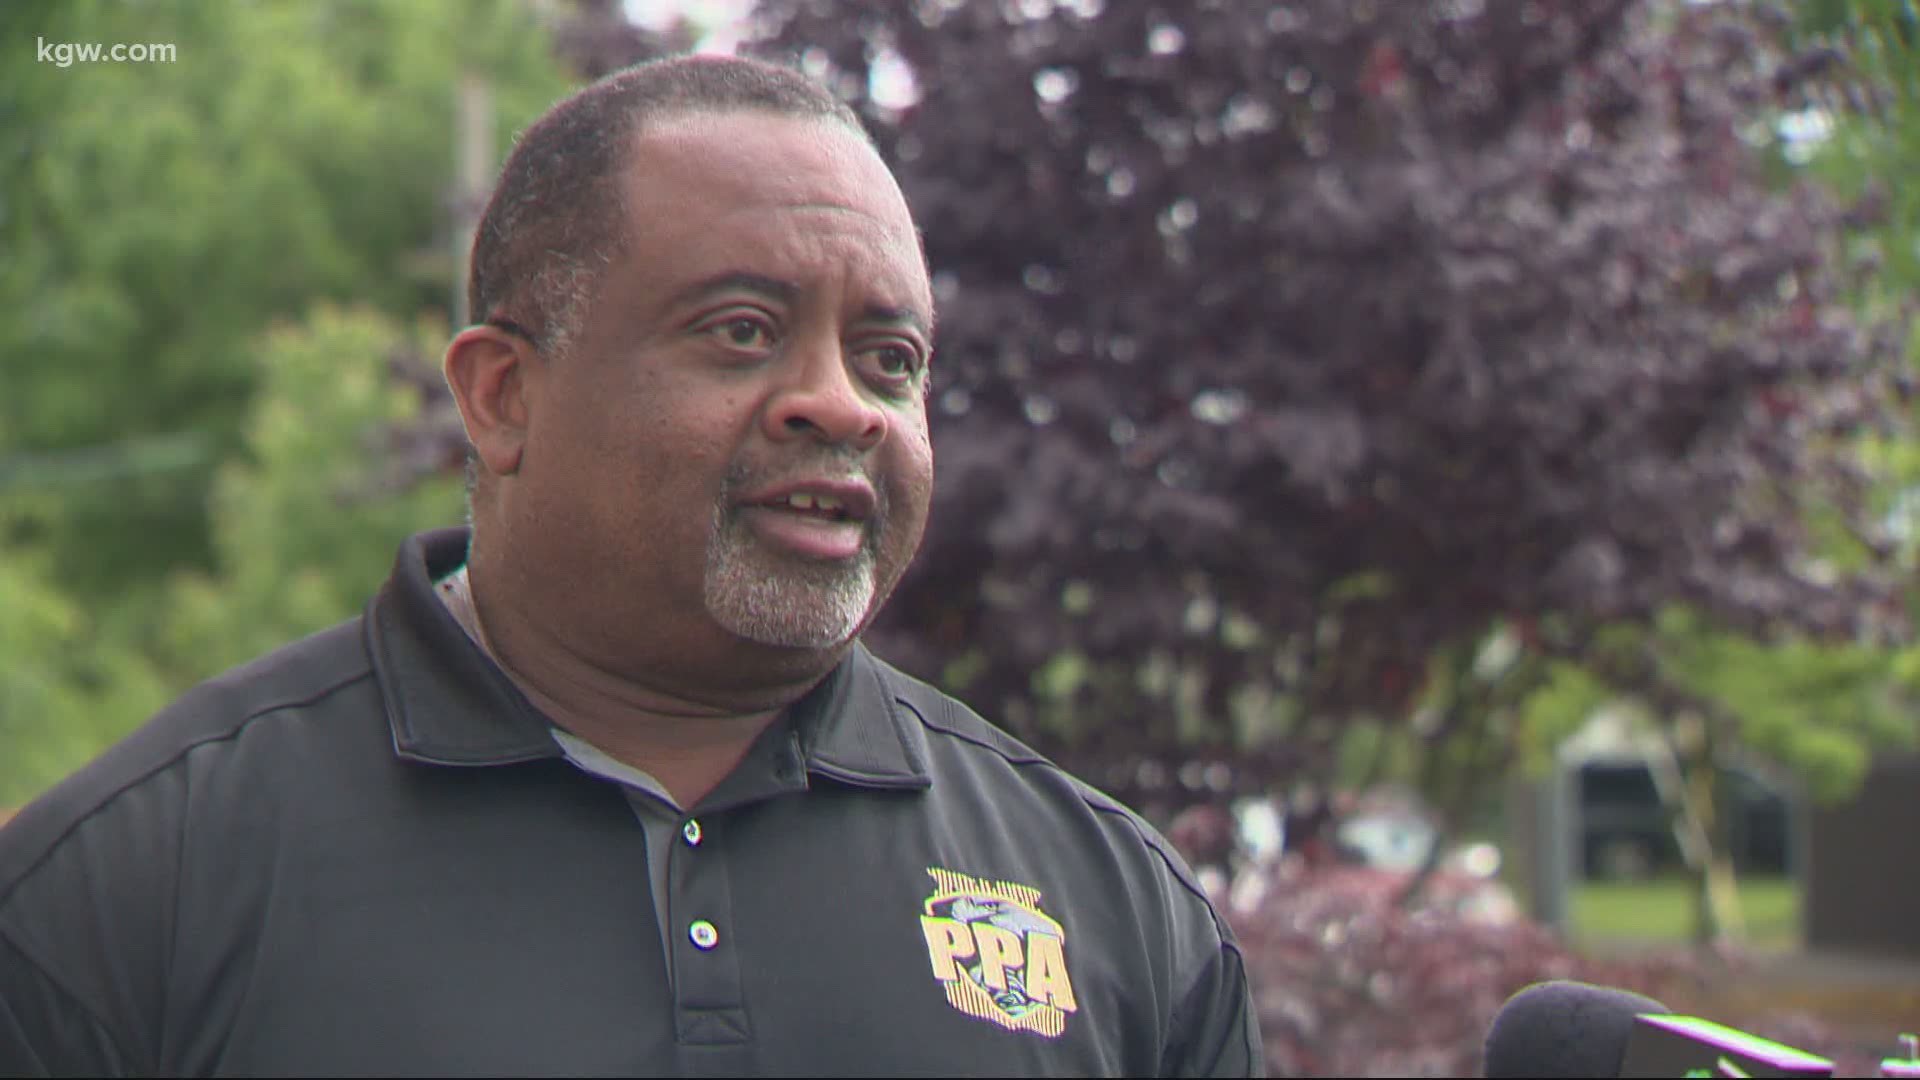 Union president Daryl Turner criticized the mayor's decision in a very long statement.